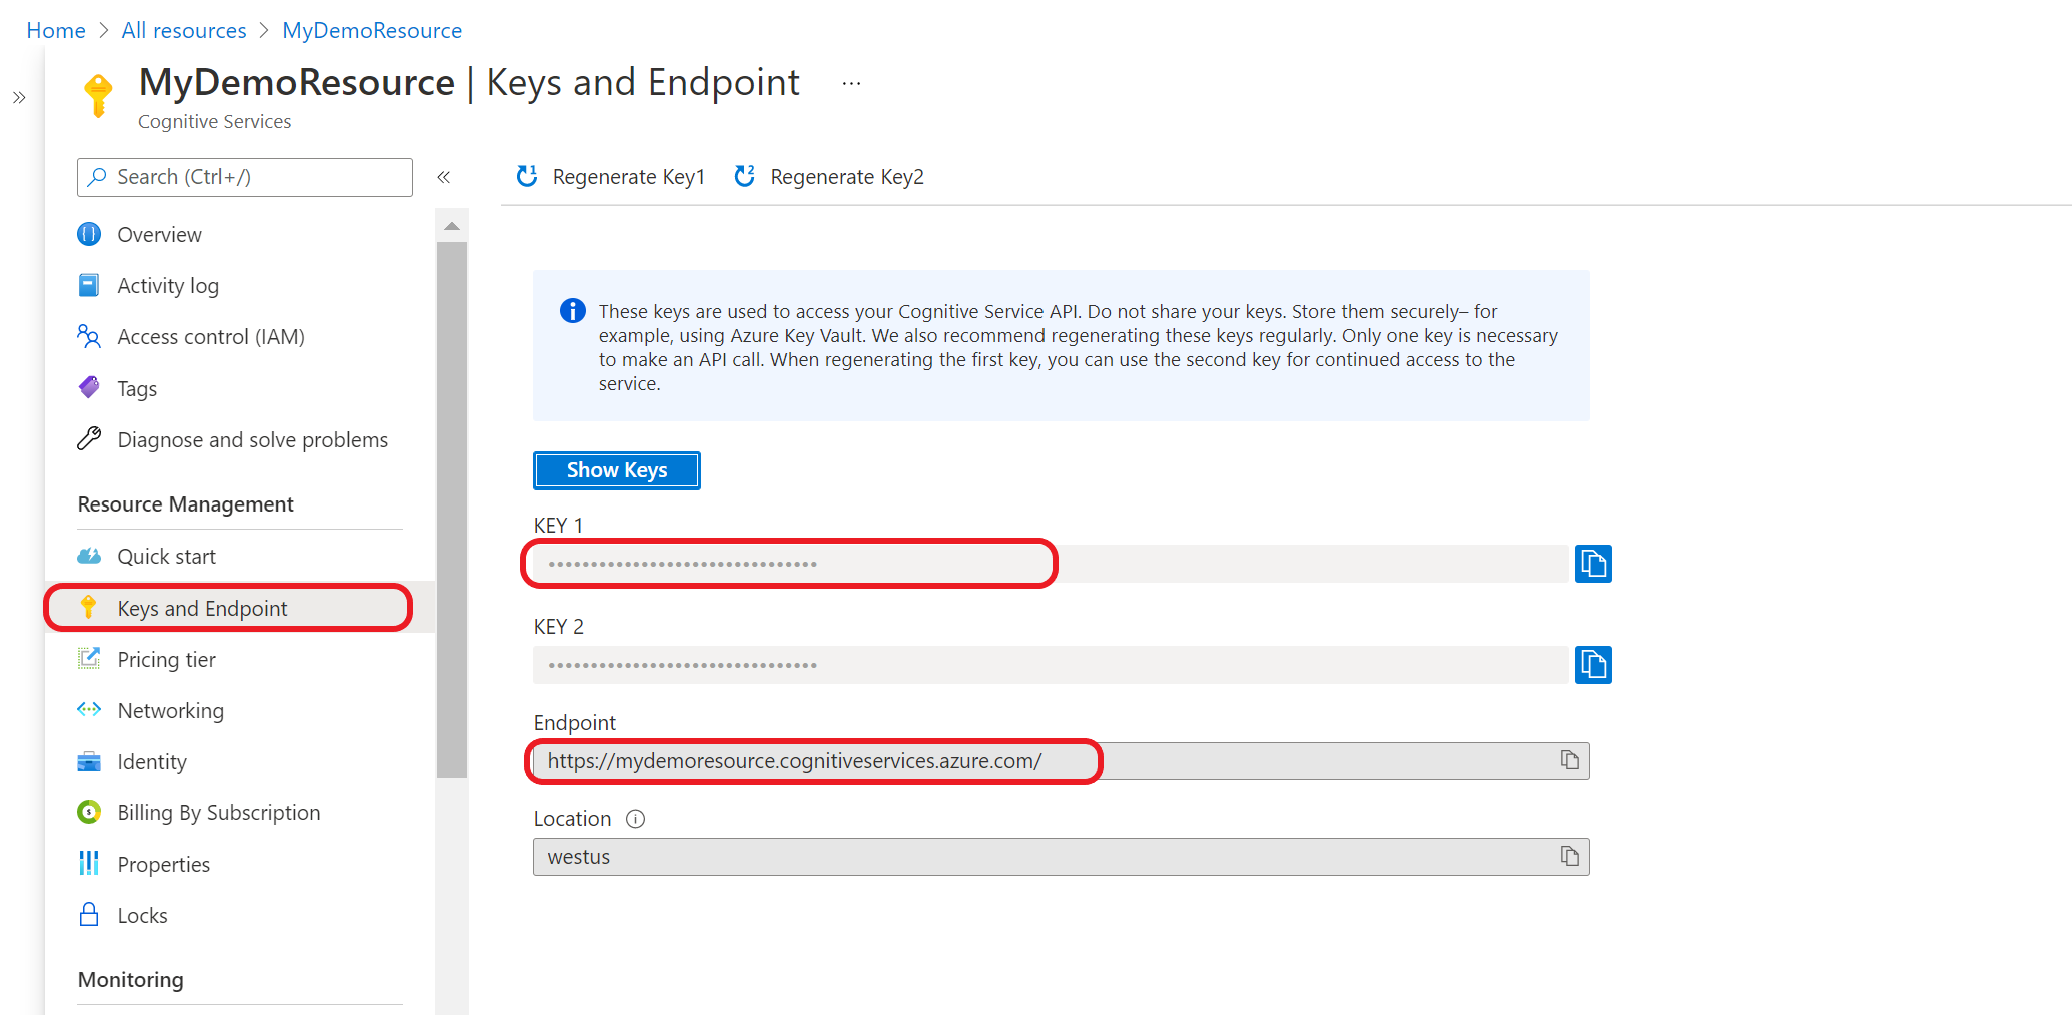 A screenshot showing the key and endpoint page in the Azure portal